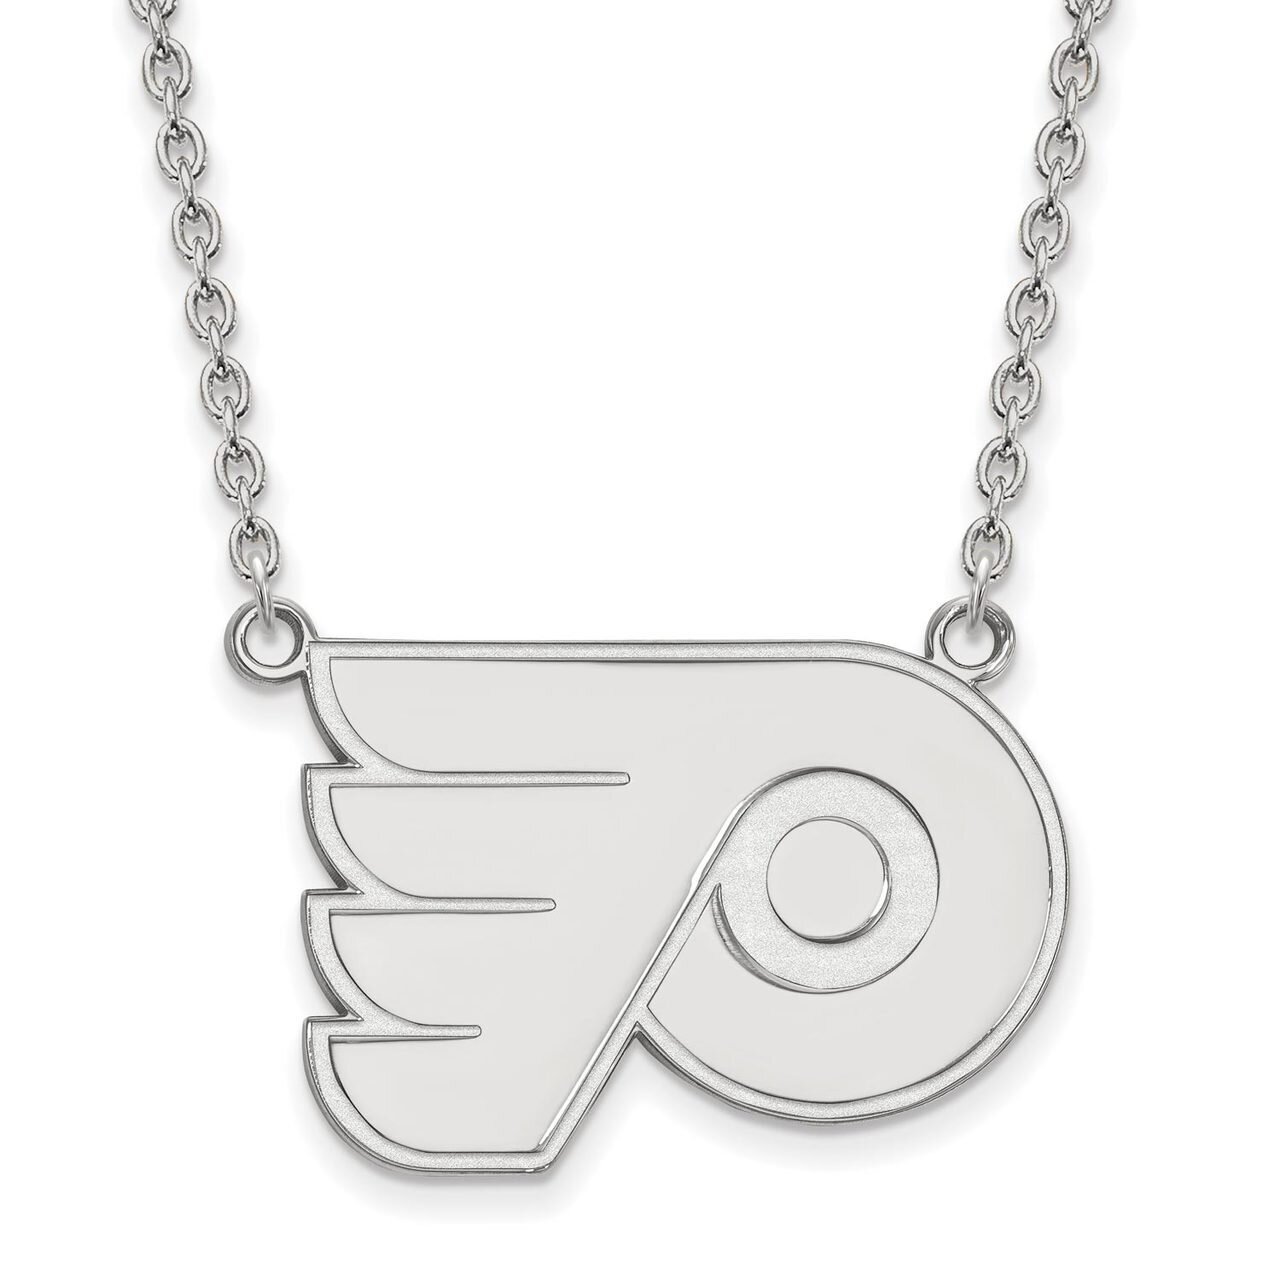 Philadelphia Flyers Large Pendant with Chain Necklace 14k White Gold 4W014FLY-18